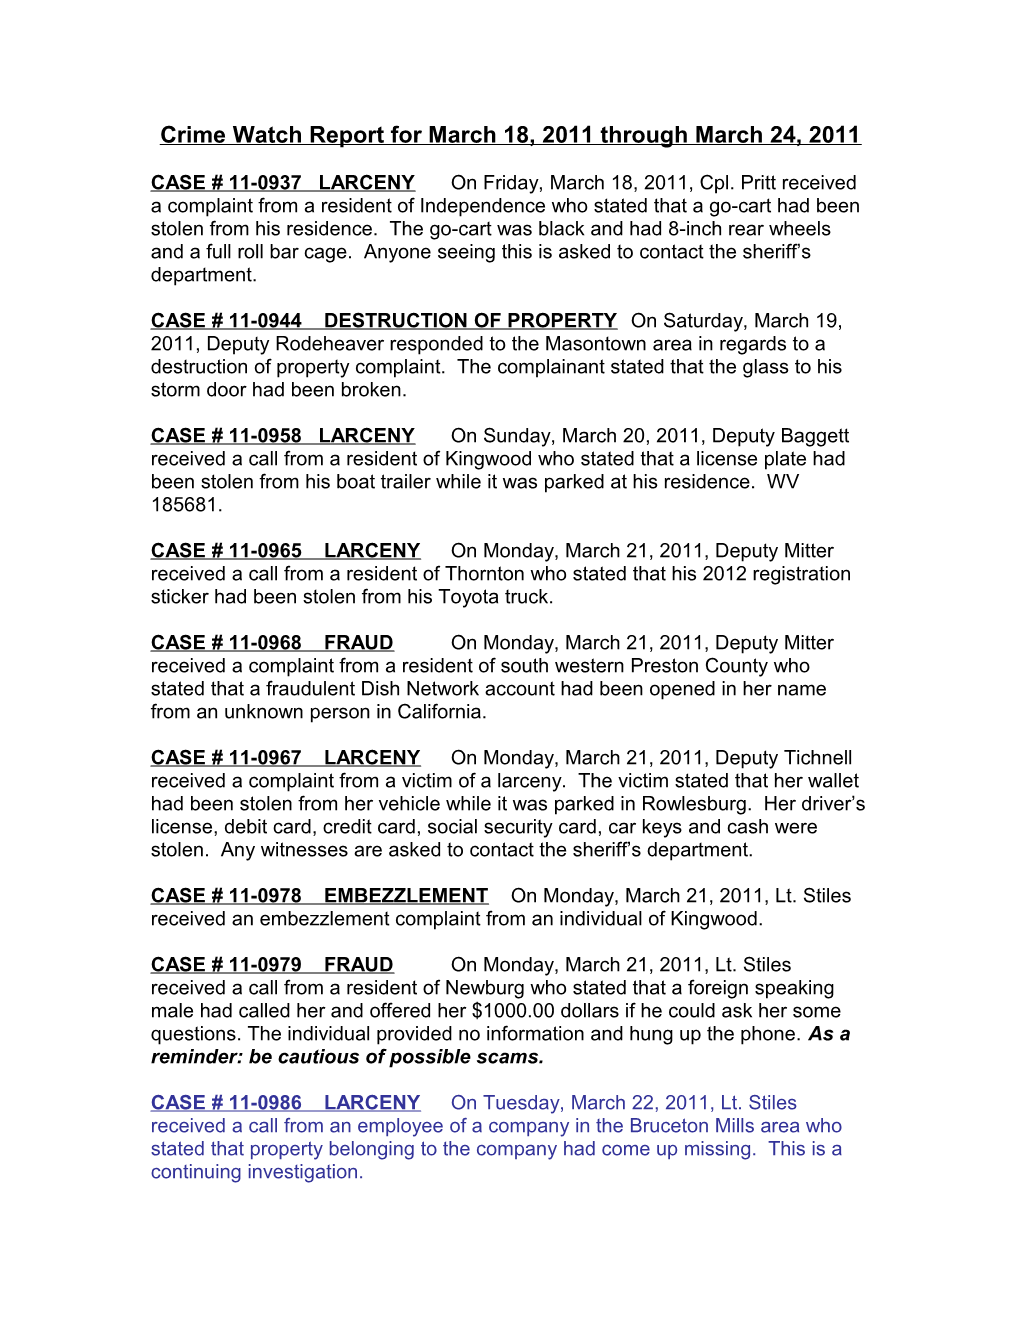 Crime Watch Report for March 18, 2011 Through March 24, 2011